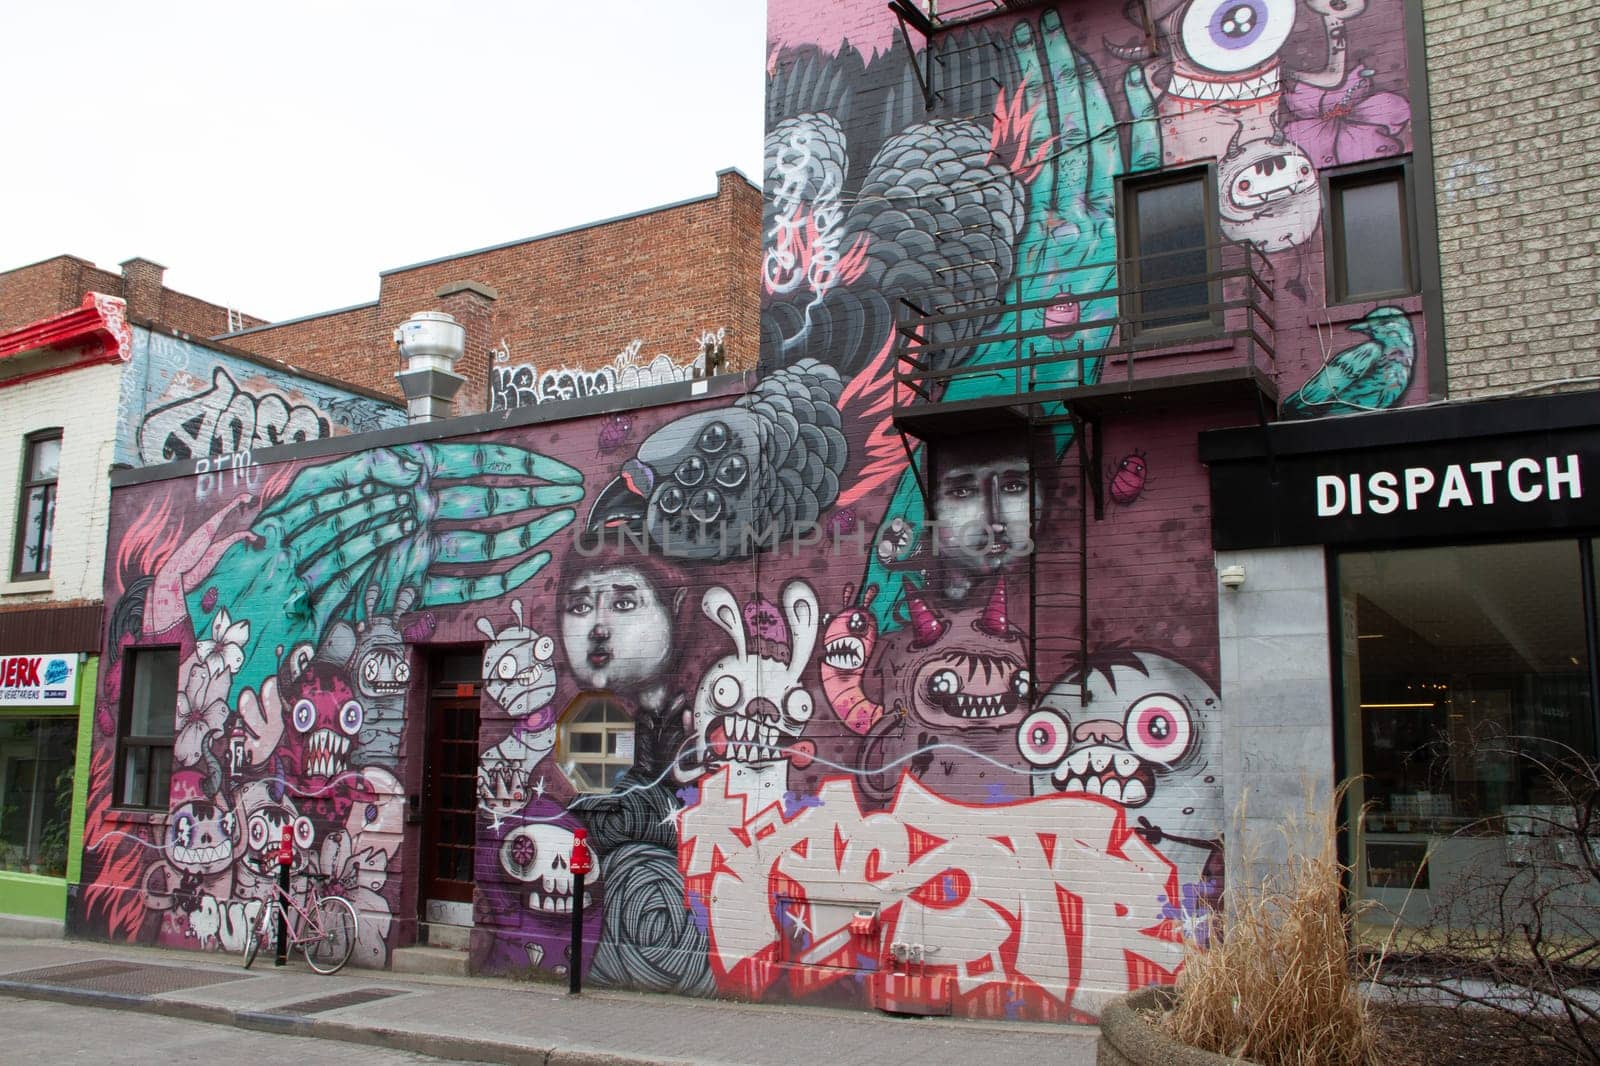 Graffiti street art mural lining a building in a side street of Montreal, Quebec by Granchinho